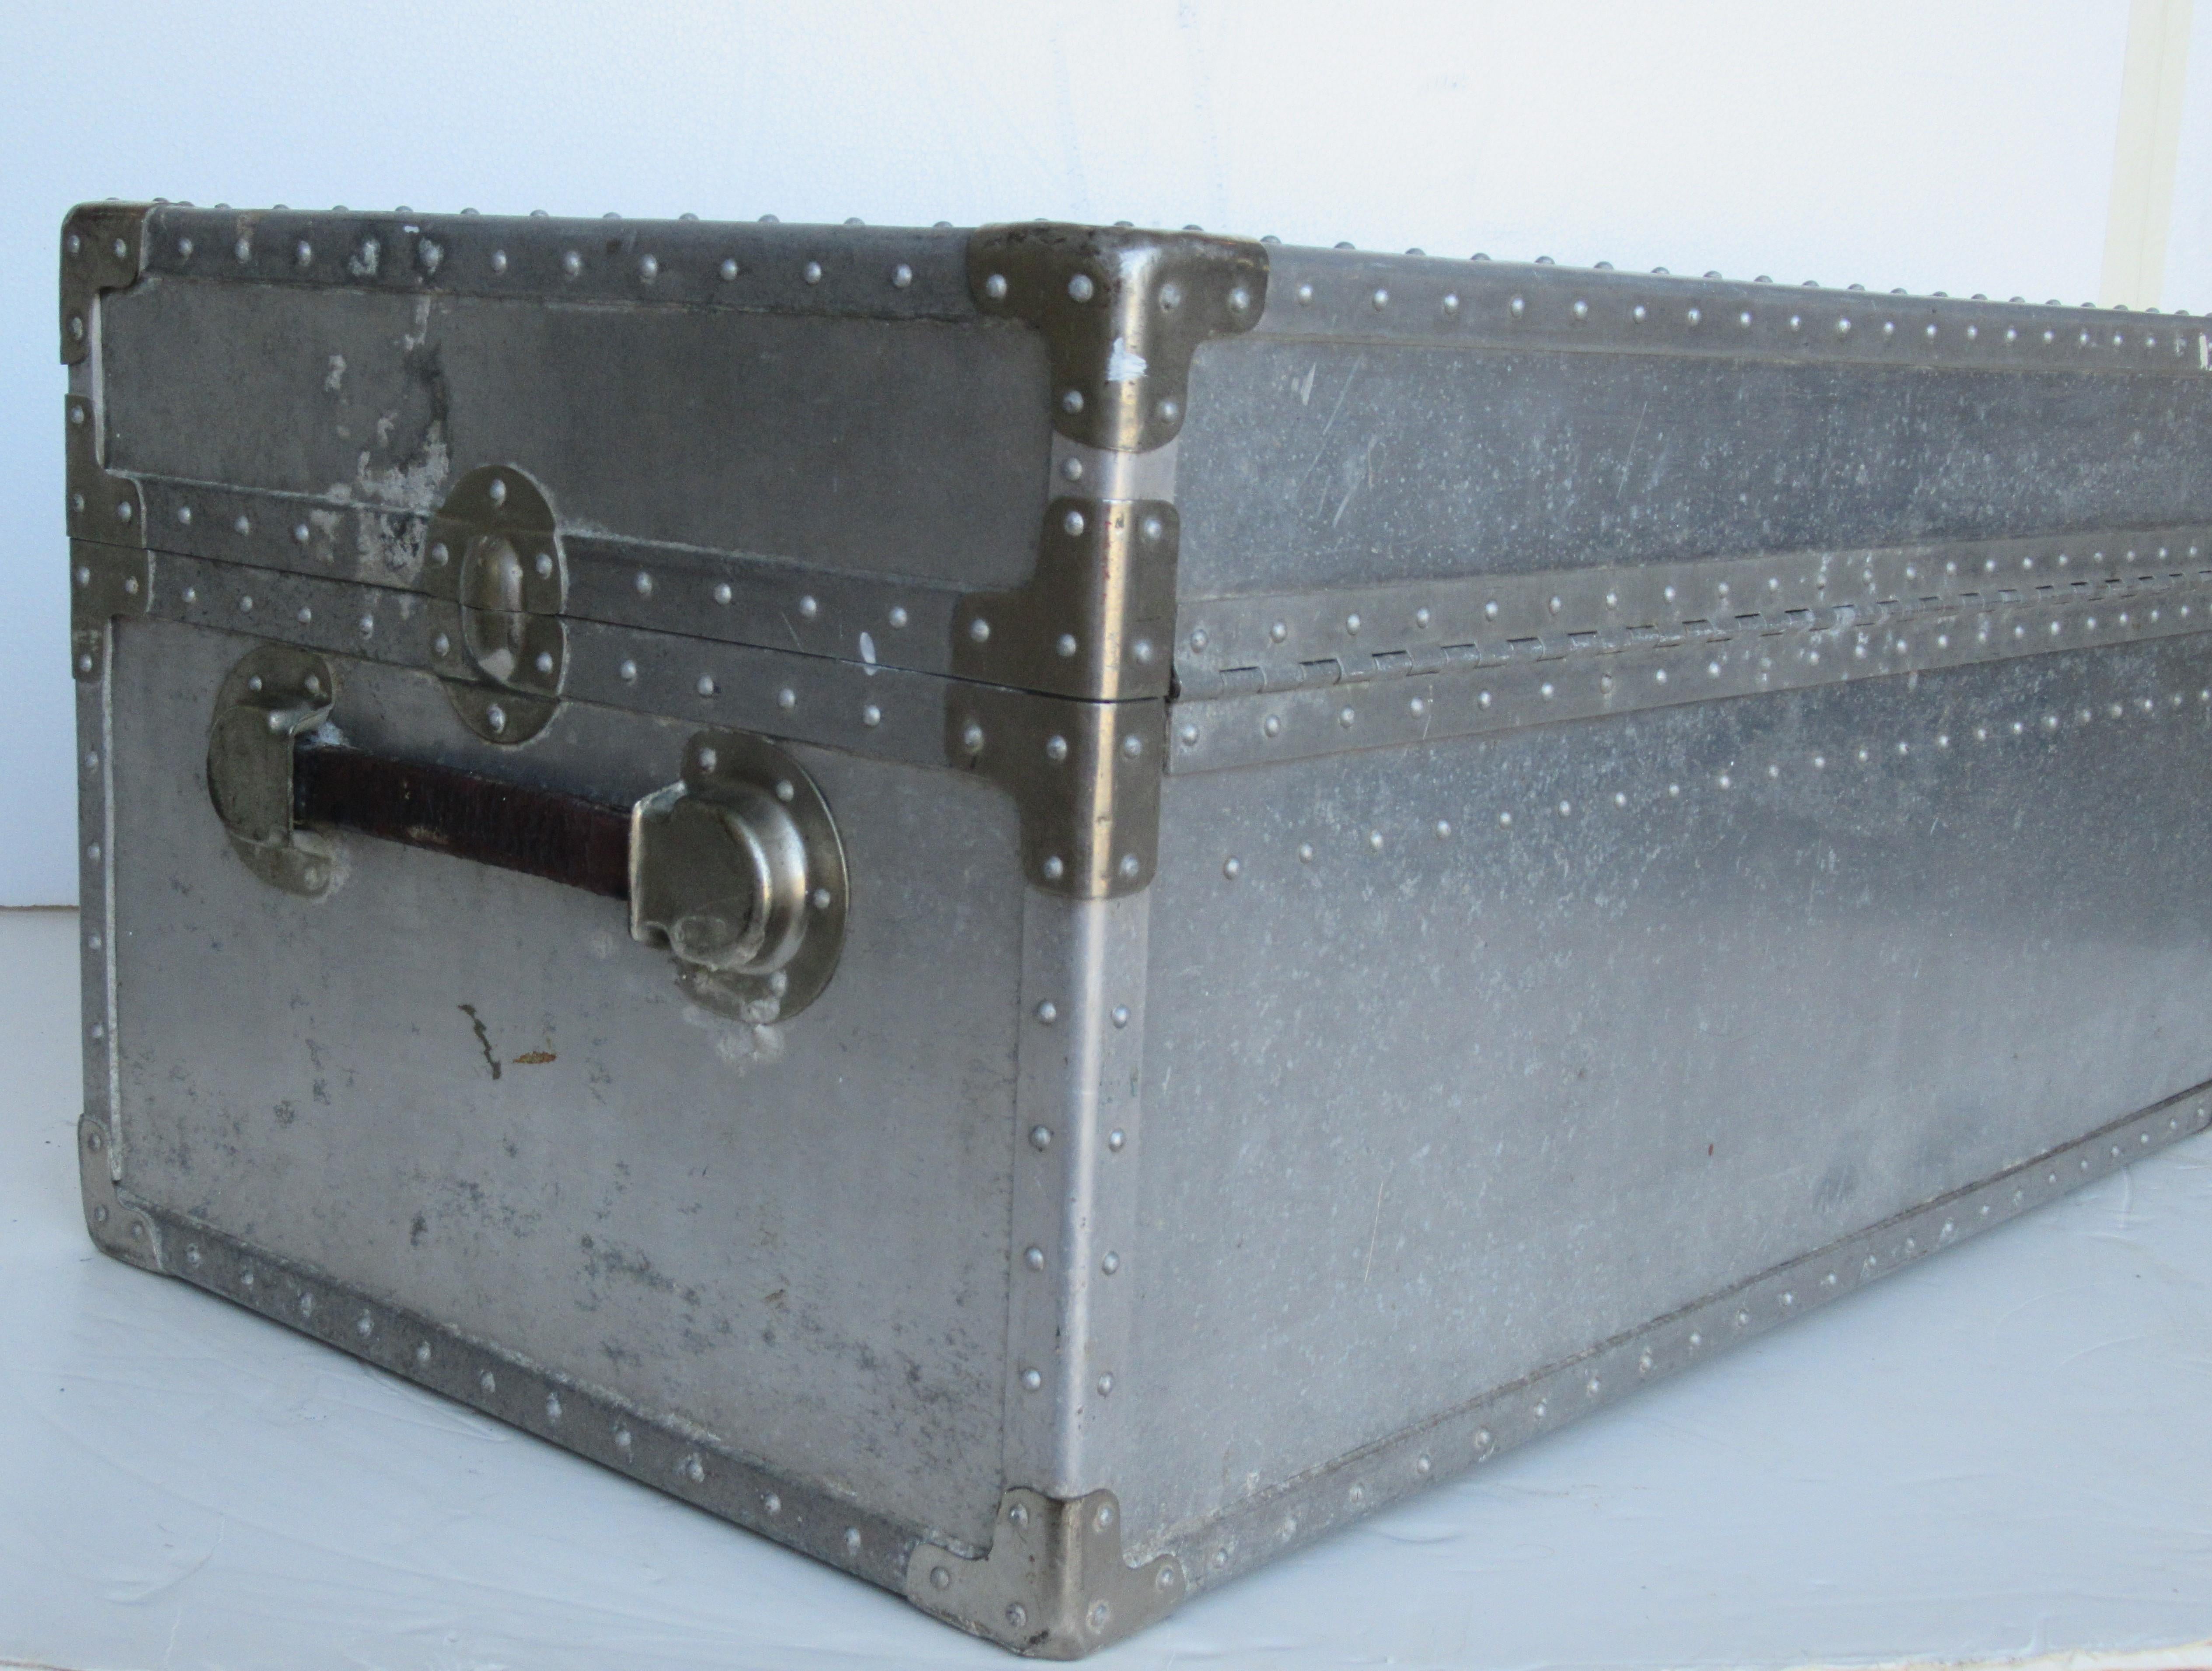 Japanese Industrial Riveted Aluminum Trunk 1940's